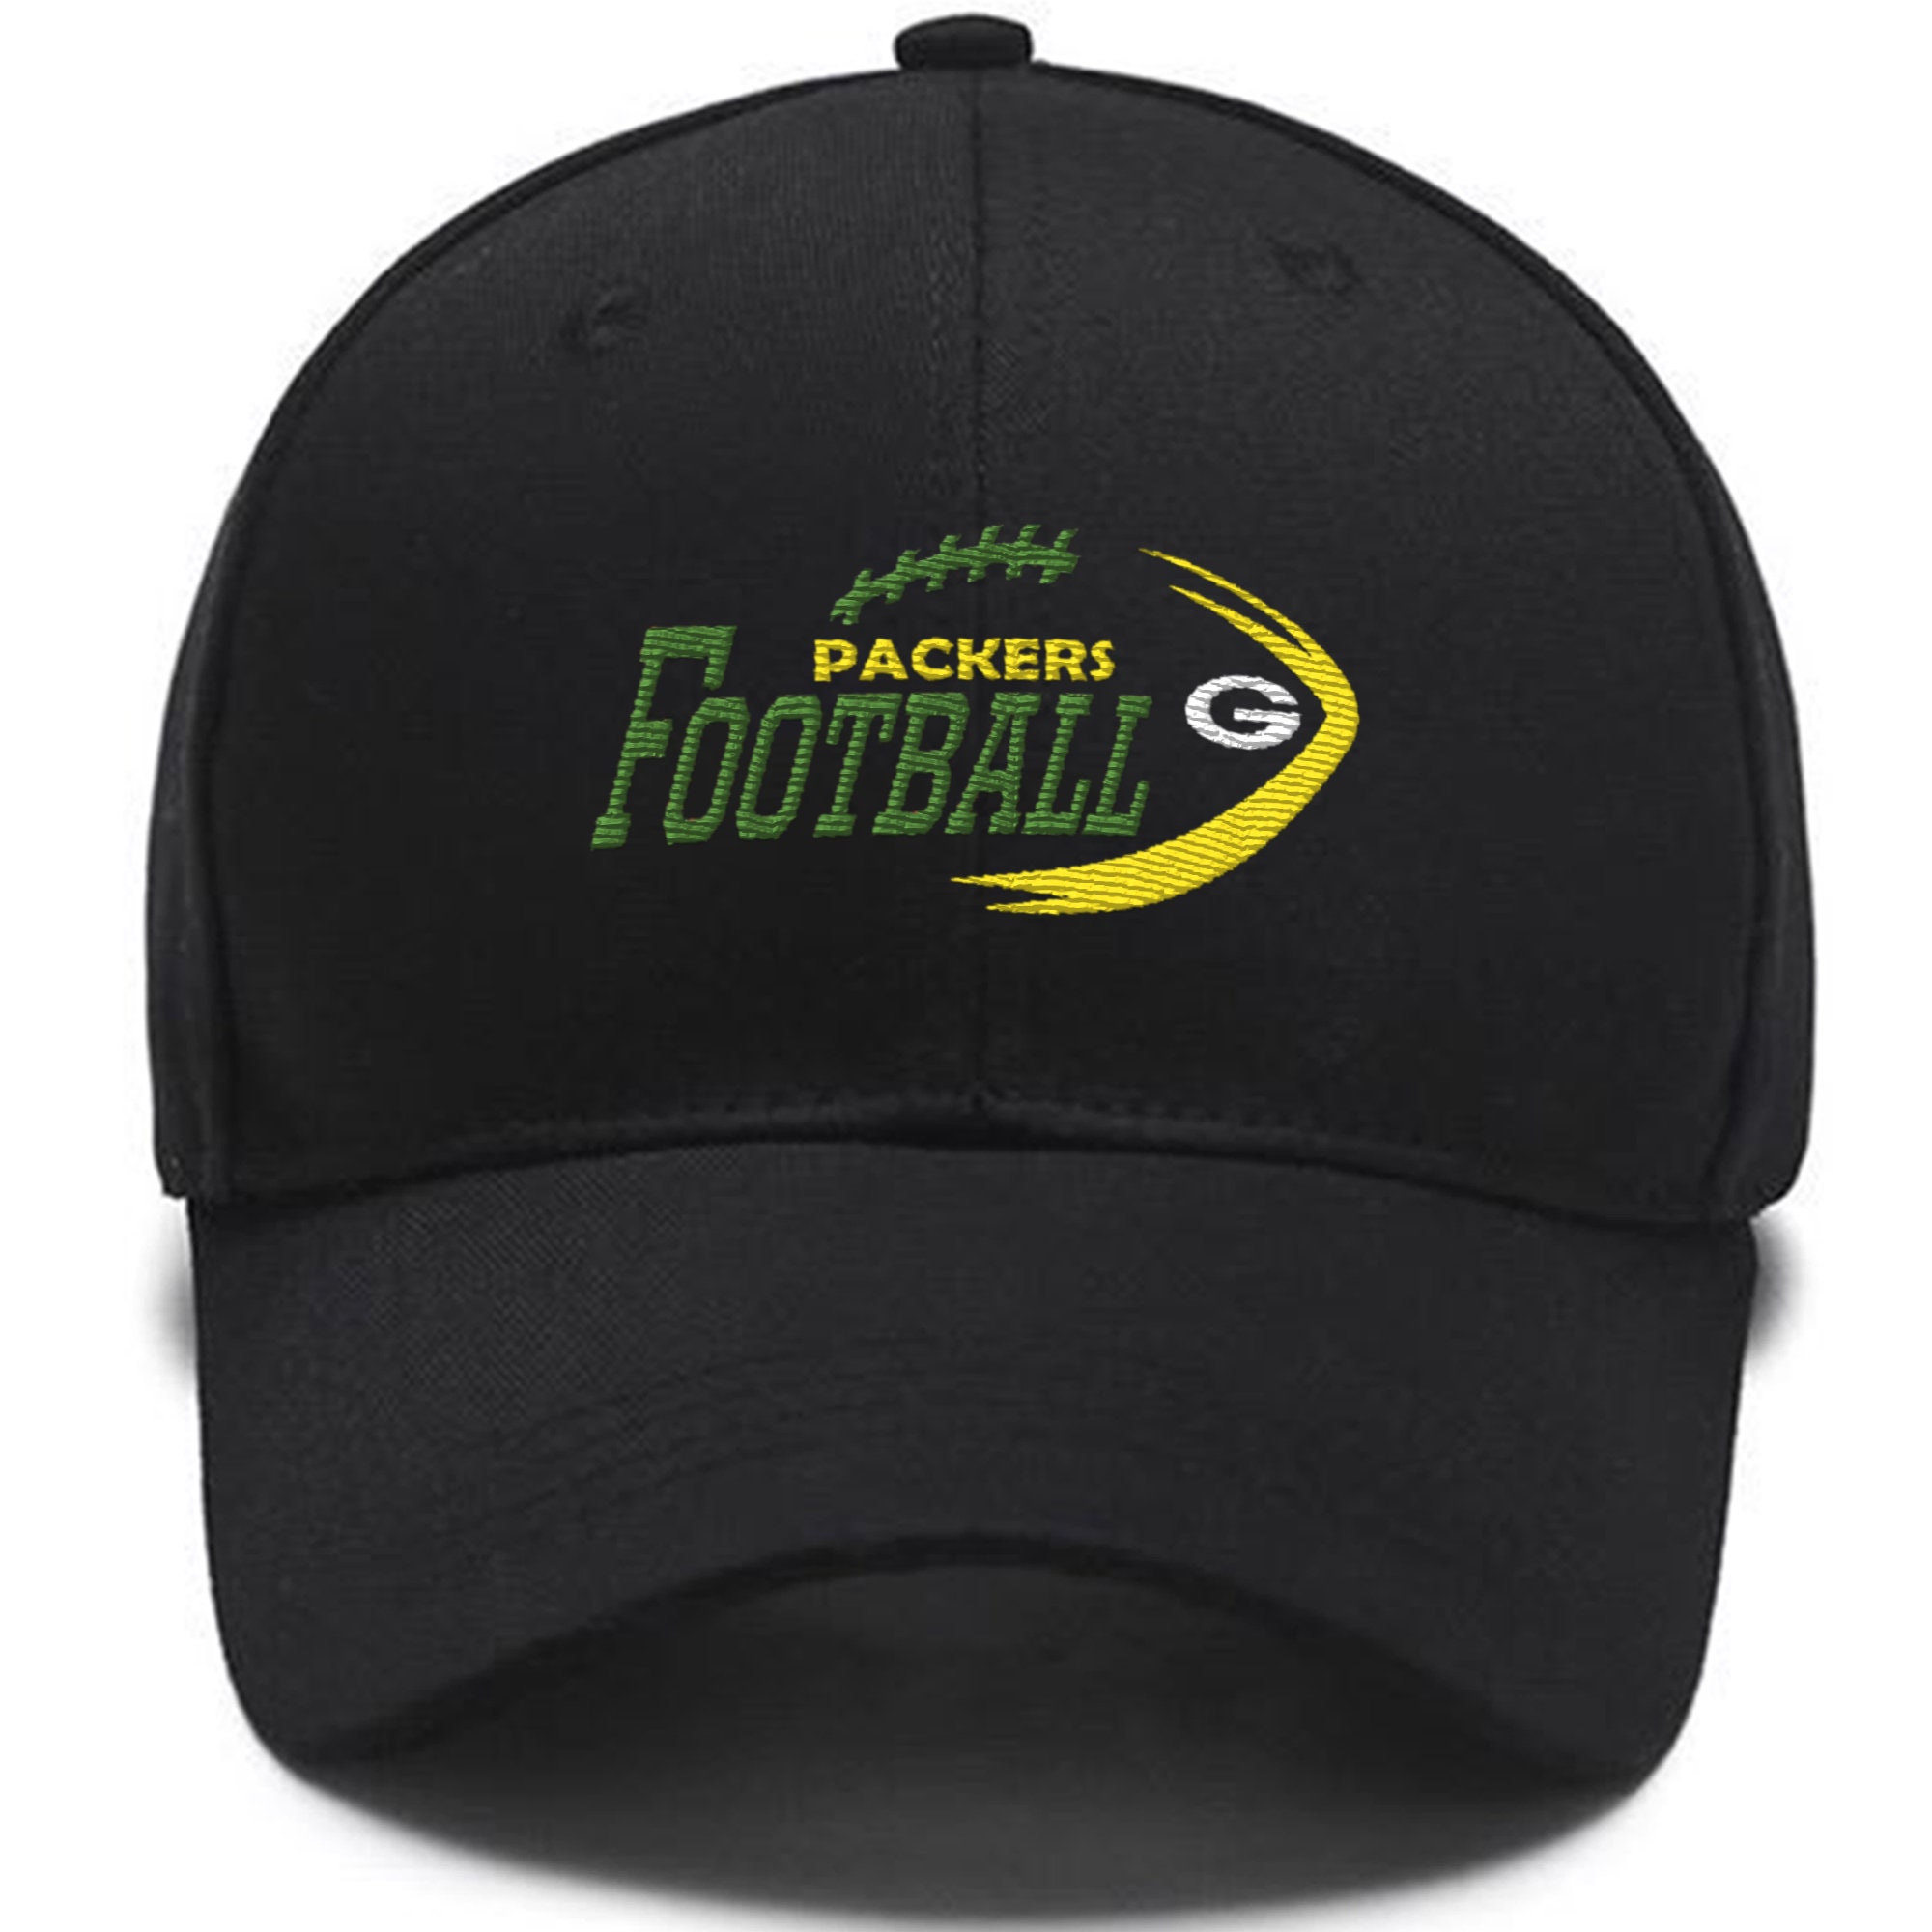 Green Bay Packers Embroidered Hat